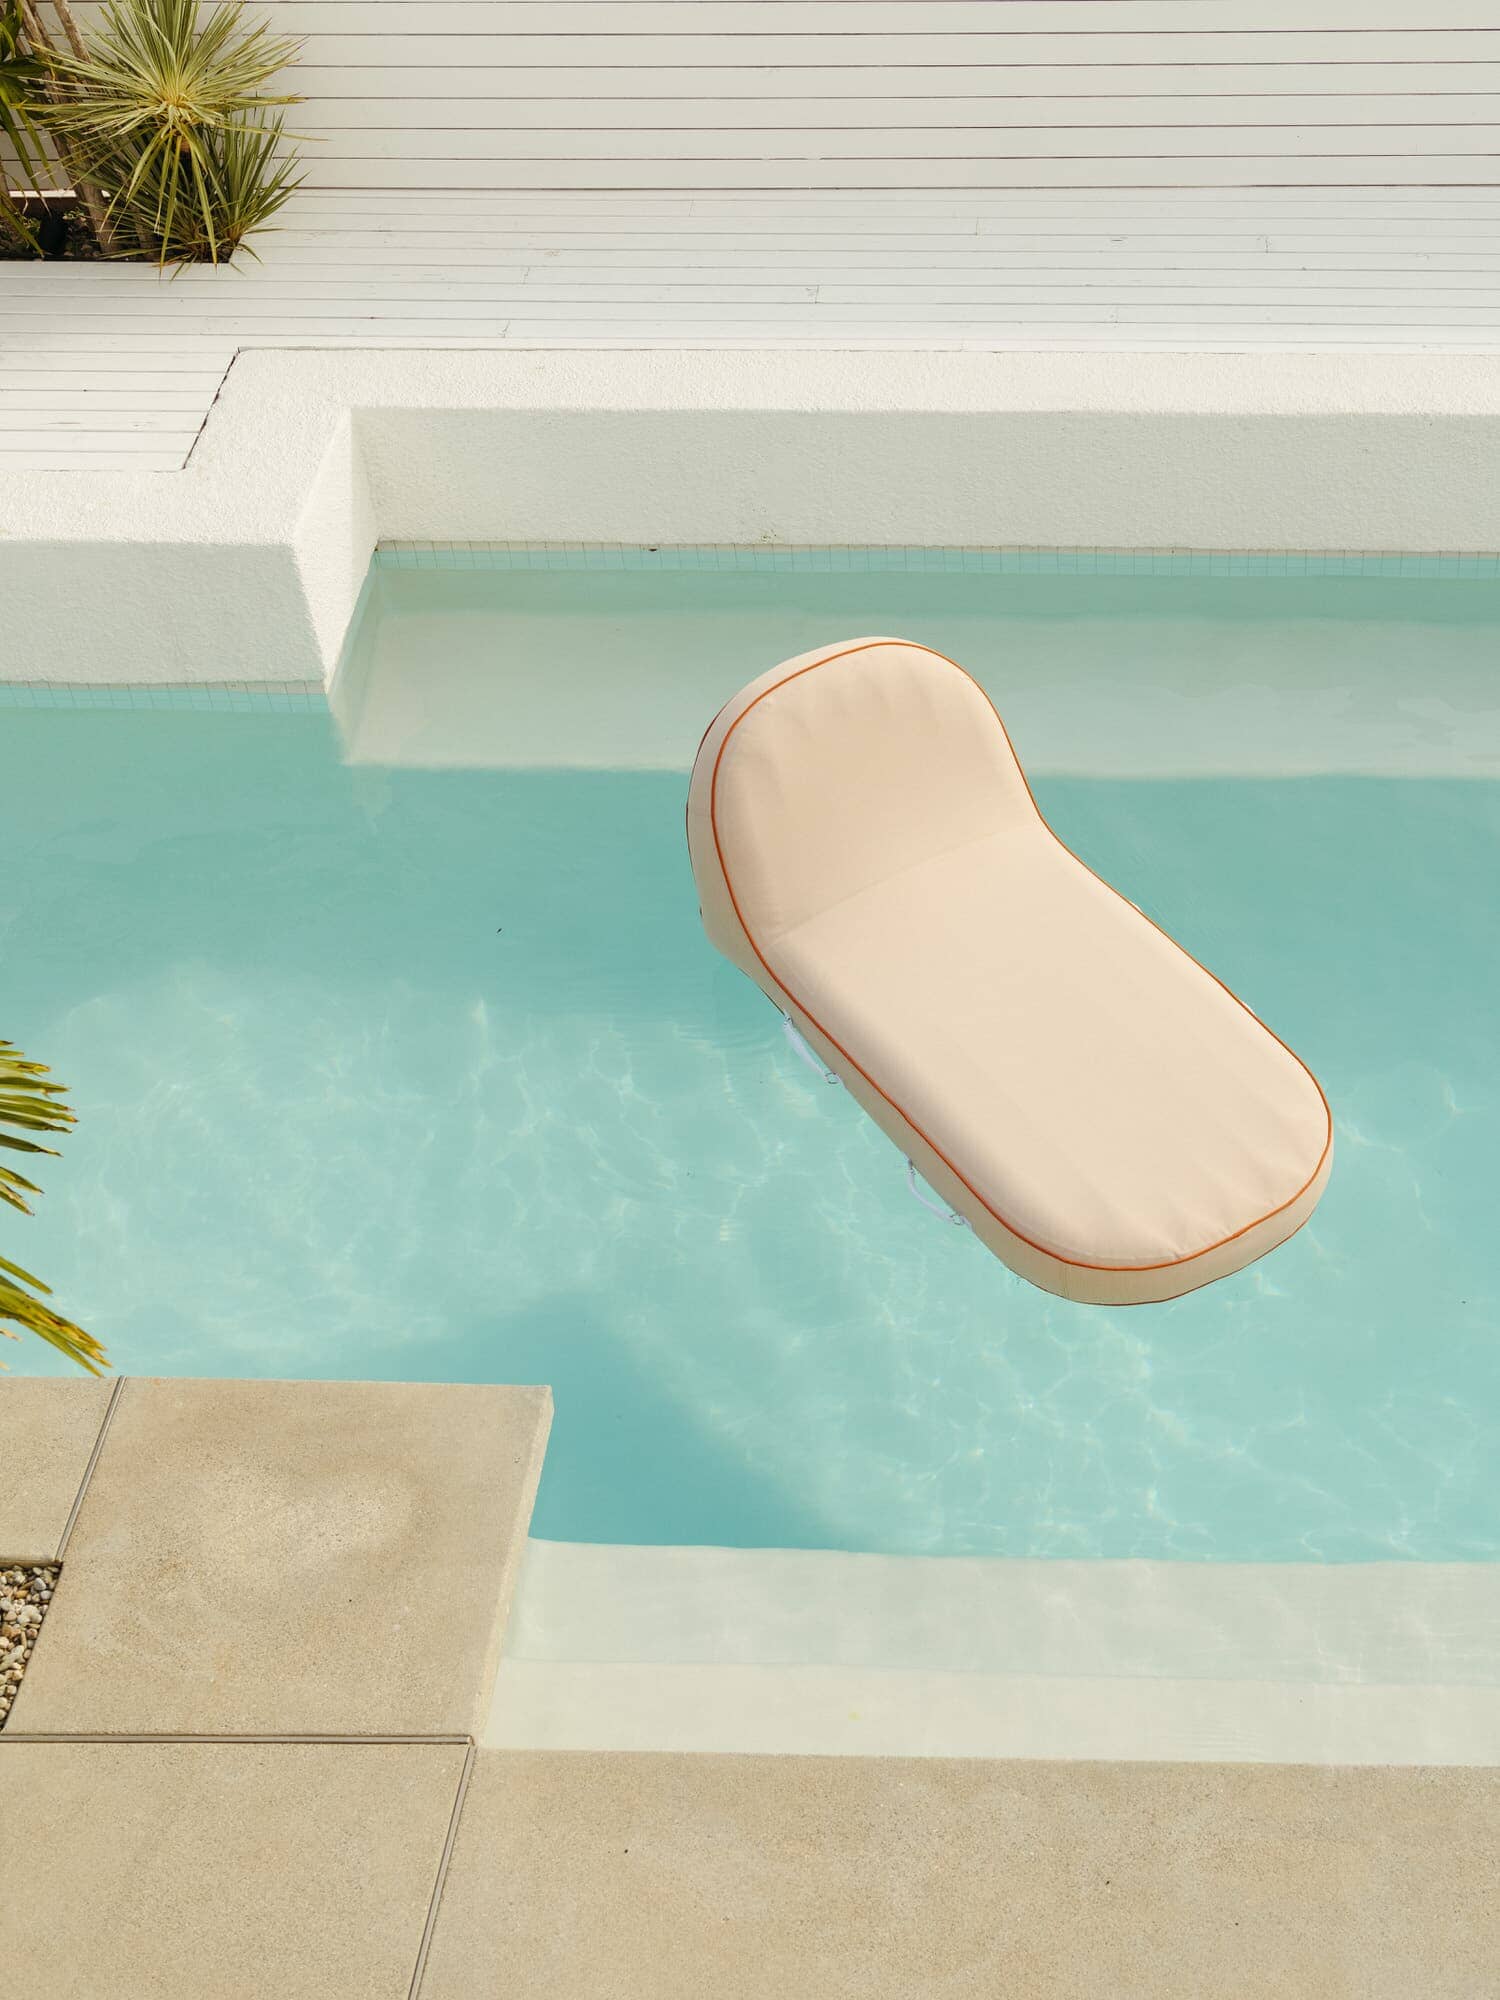 The Pool Lounger - Rivie Pink Pool Lounger Business & Pleasure Co Aus 